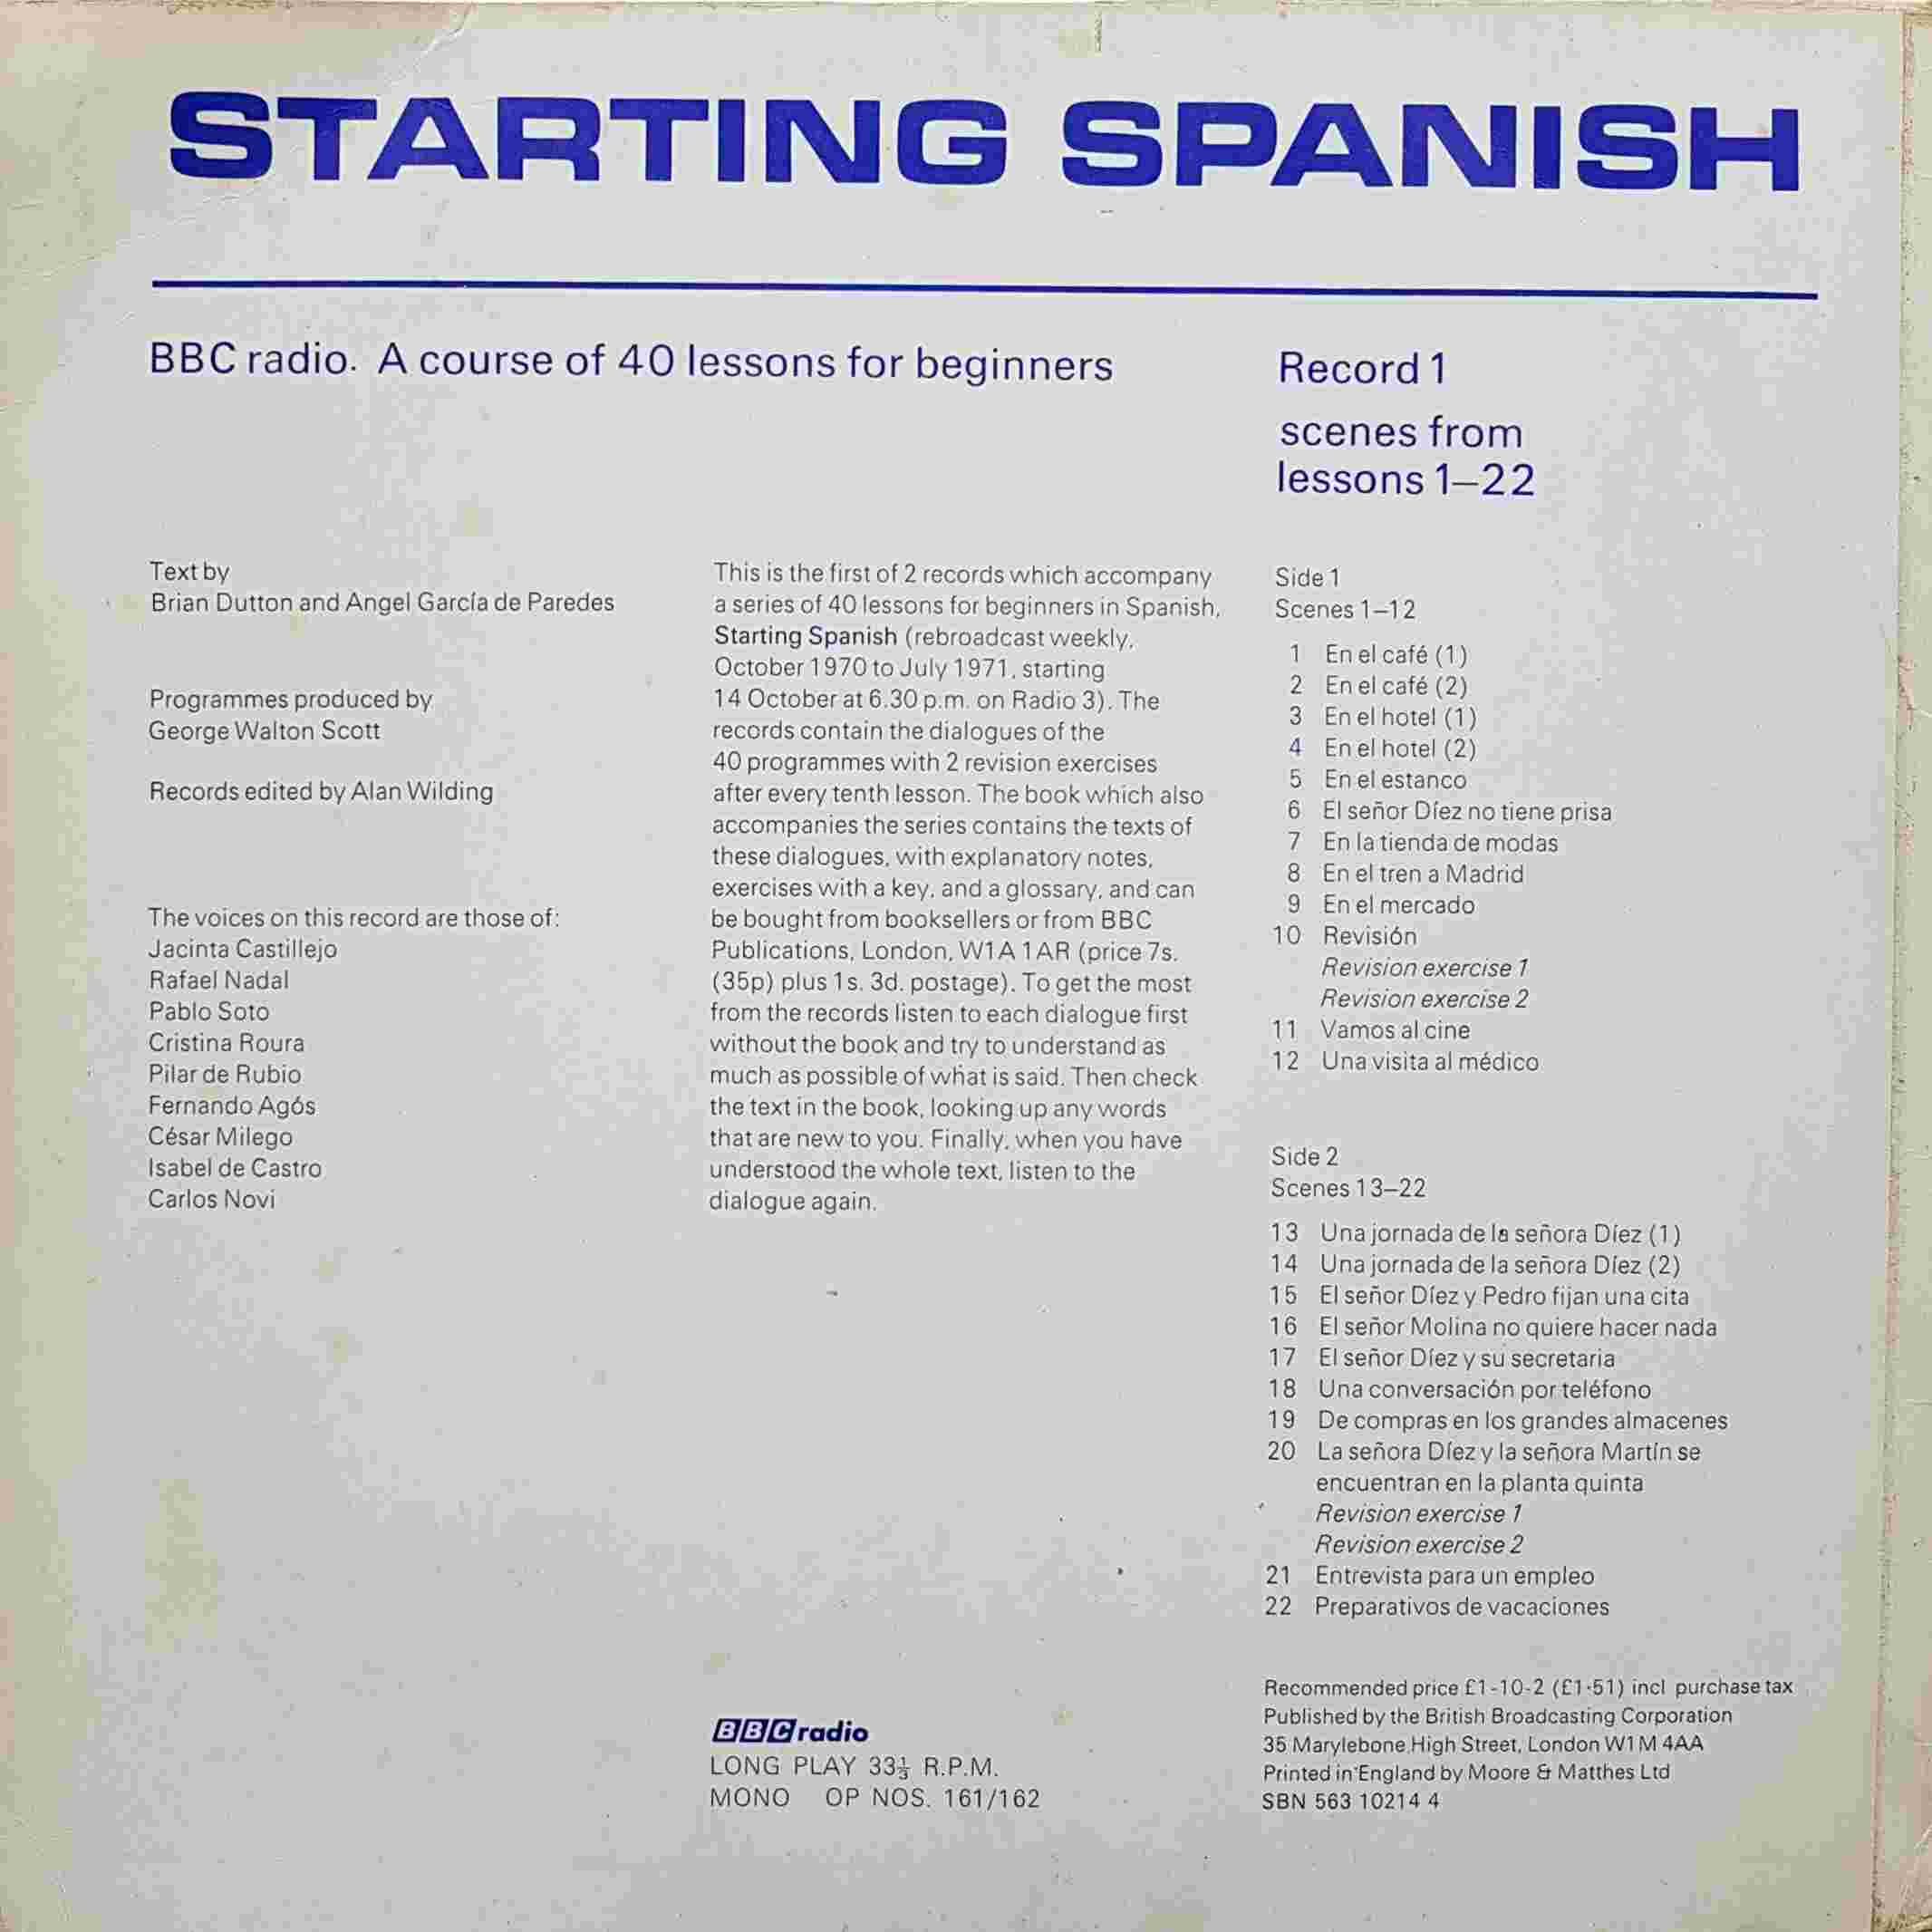 Picture of OP 161/162 Starting Spanish - A BBC Radio course of 40 lessons for beginners - Record 1 - Lessons 1 - 22 by artist Brian Dutton / Angel Garcia de Paredes from the BBC records and Tapes library